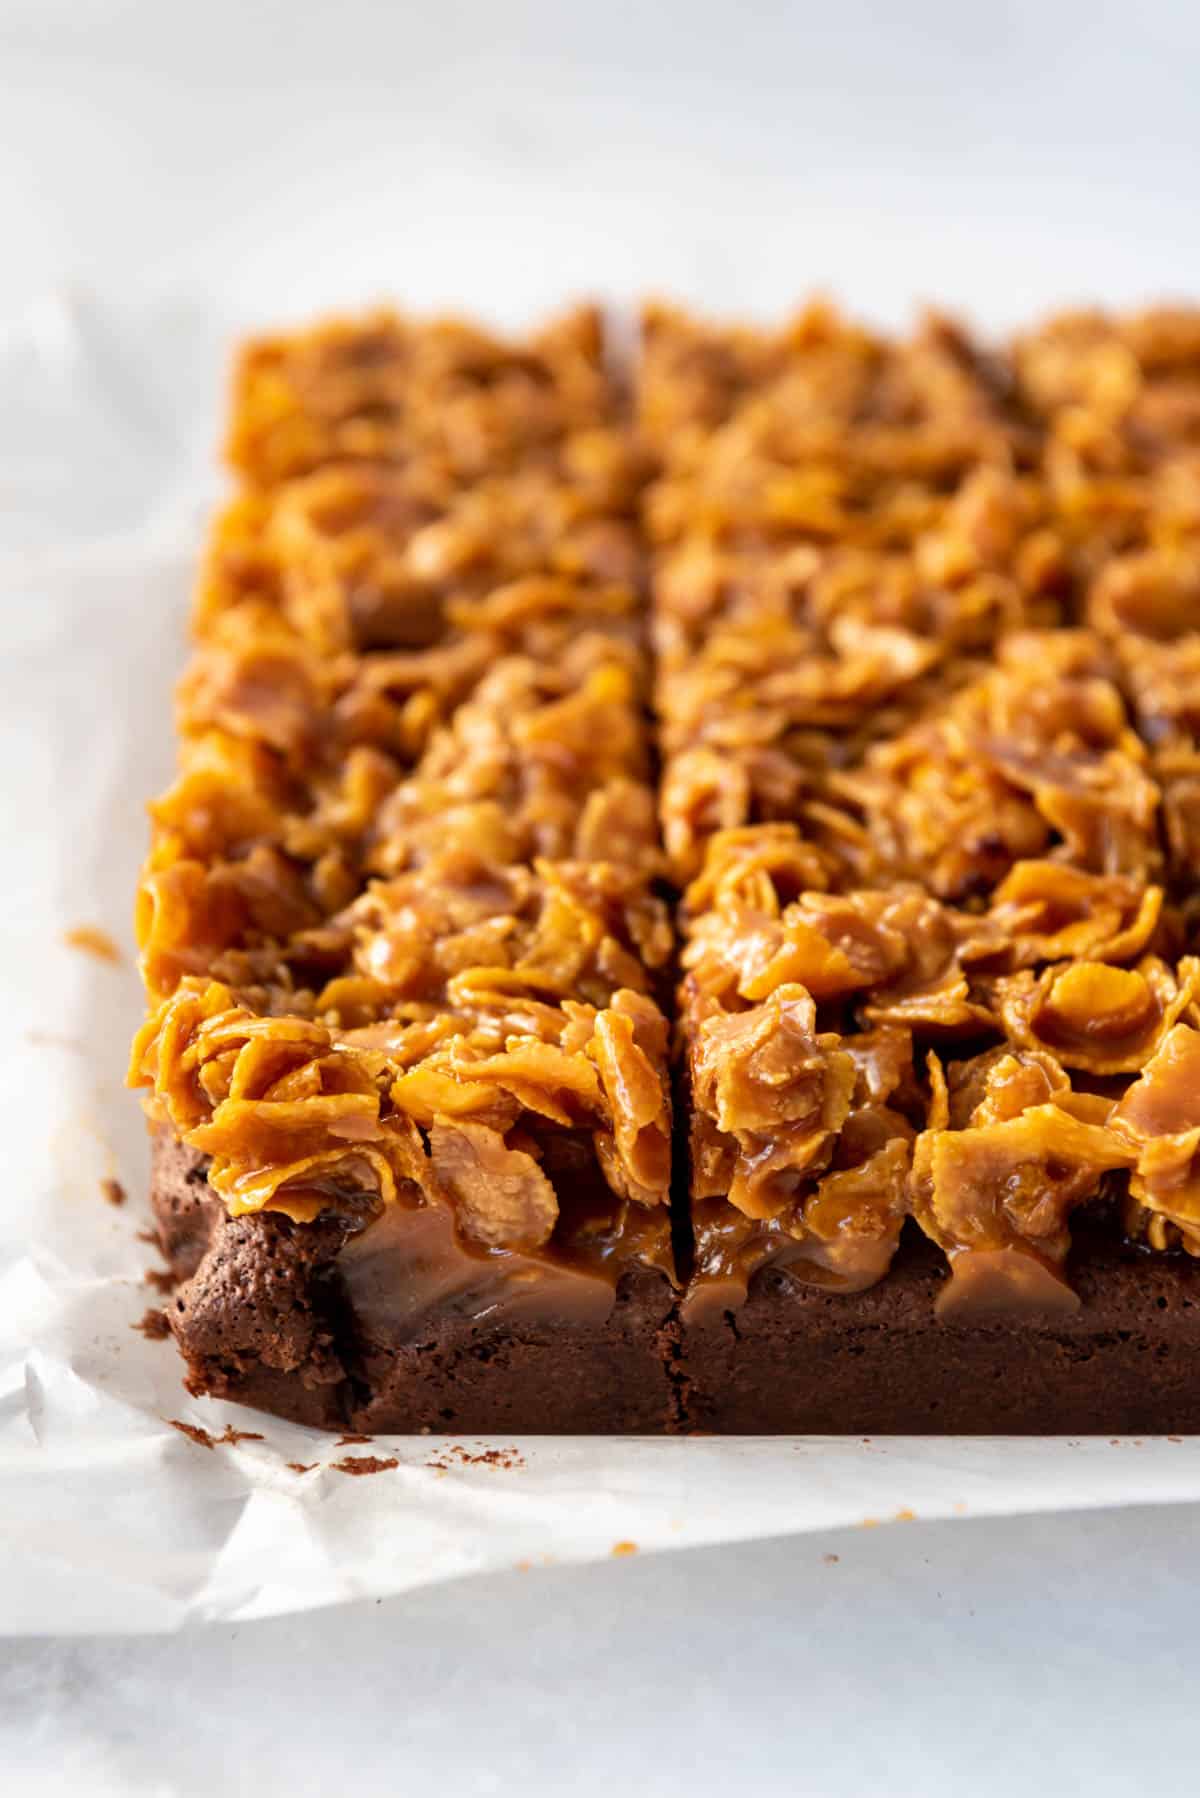 Homemade fudge brownies topped with a caramel cornflake mixture on parchment paper.